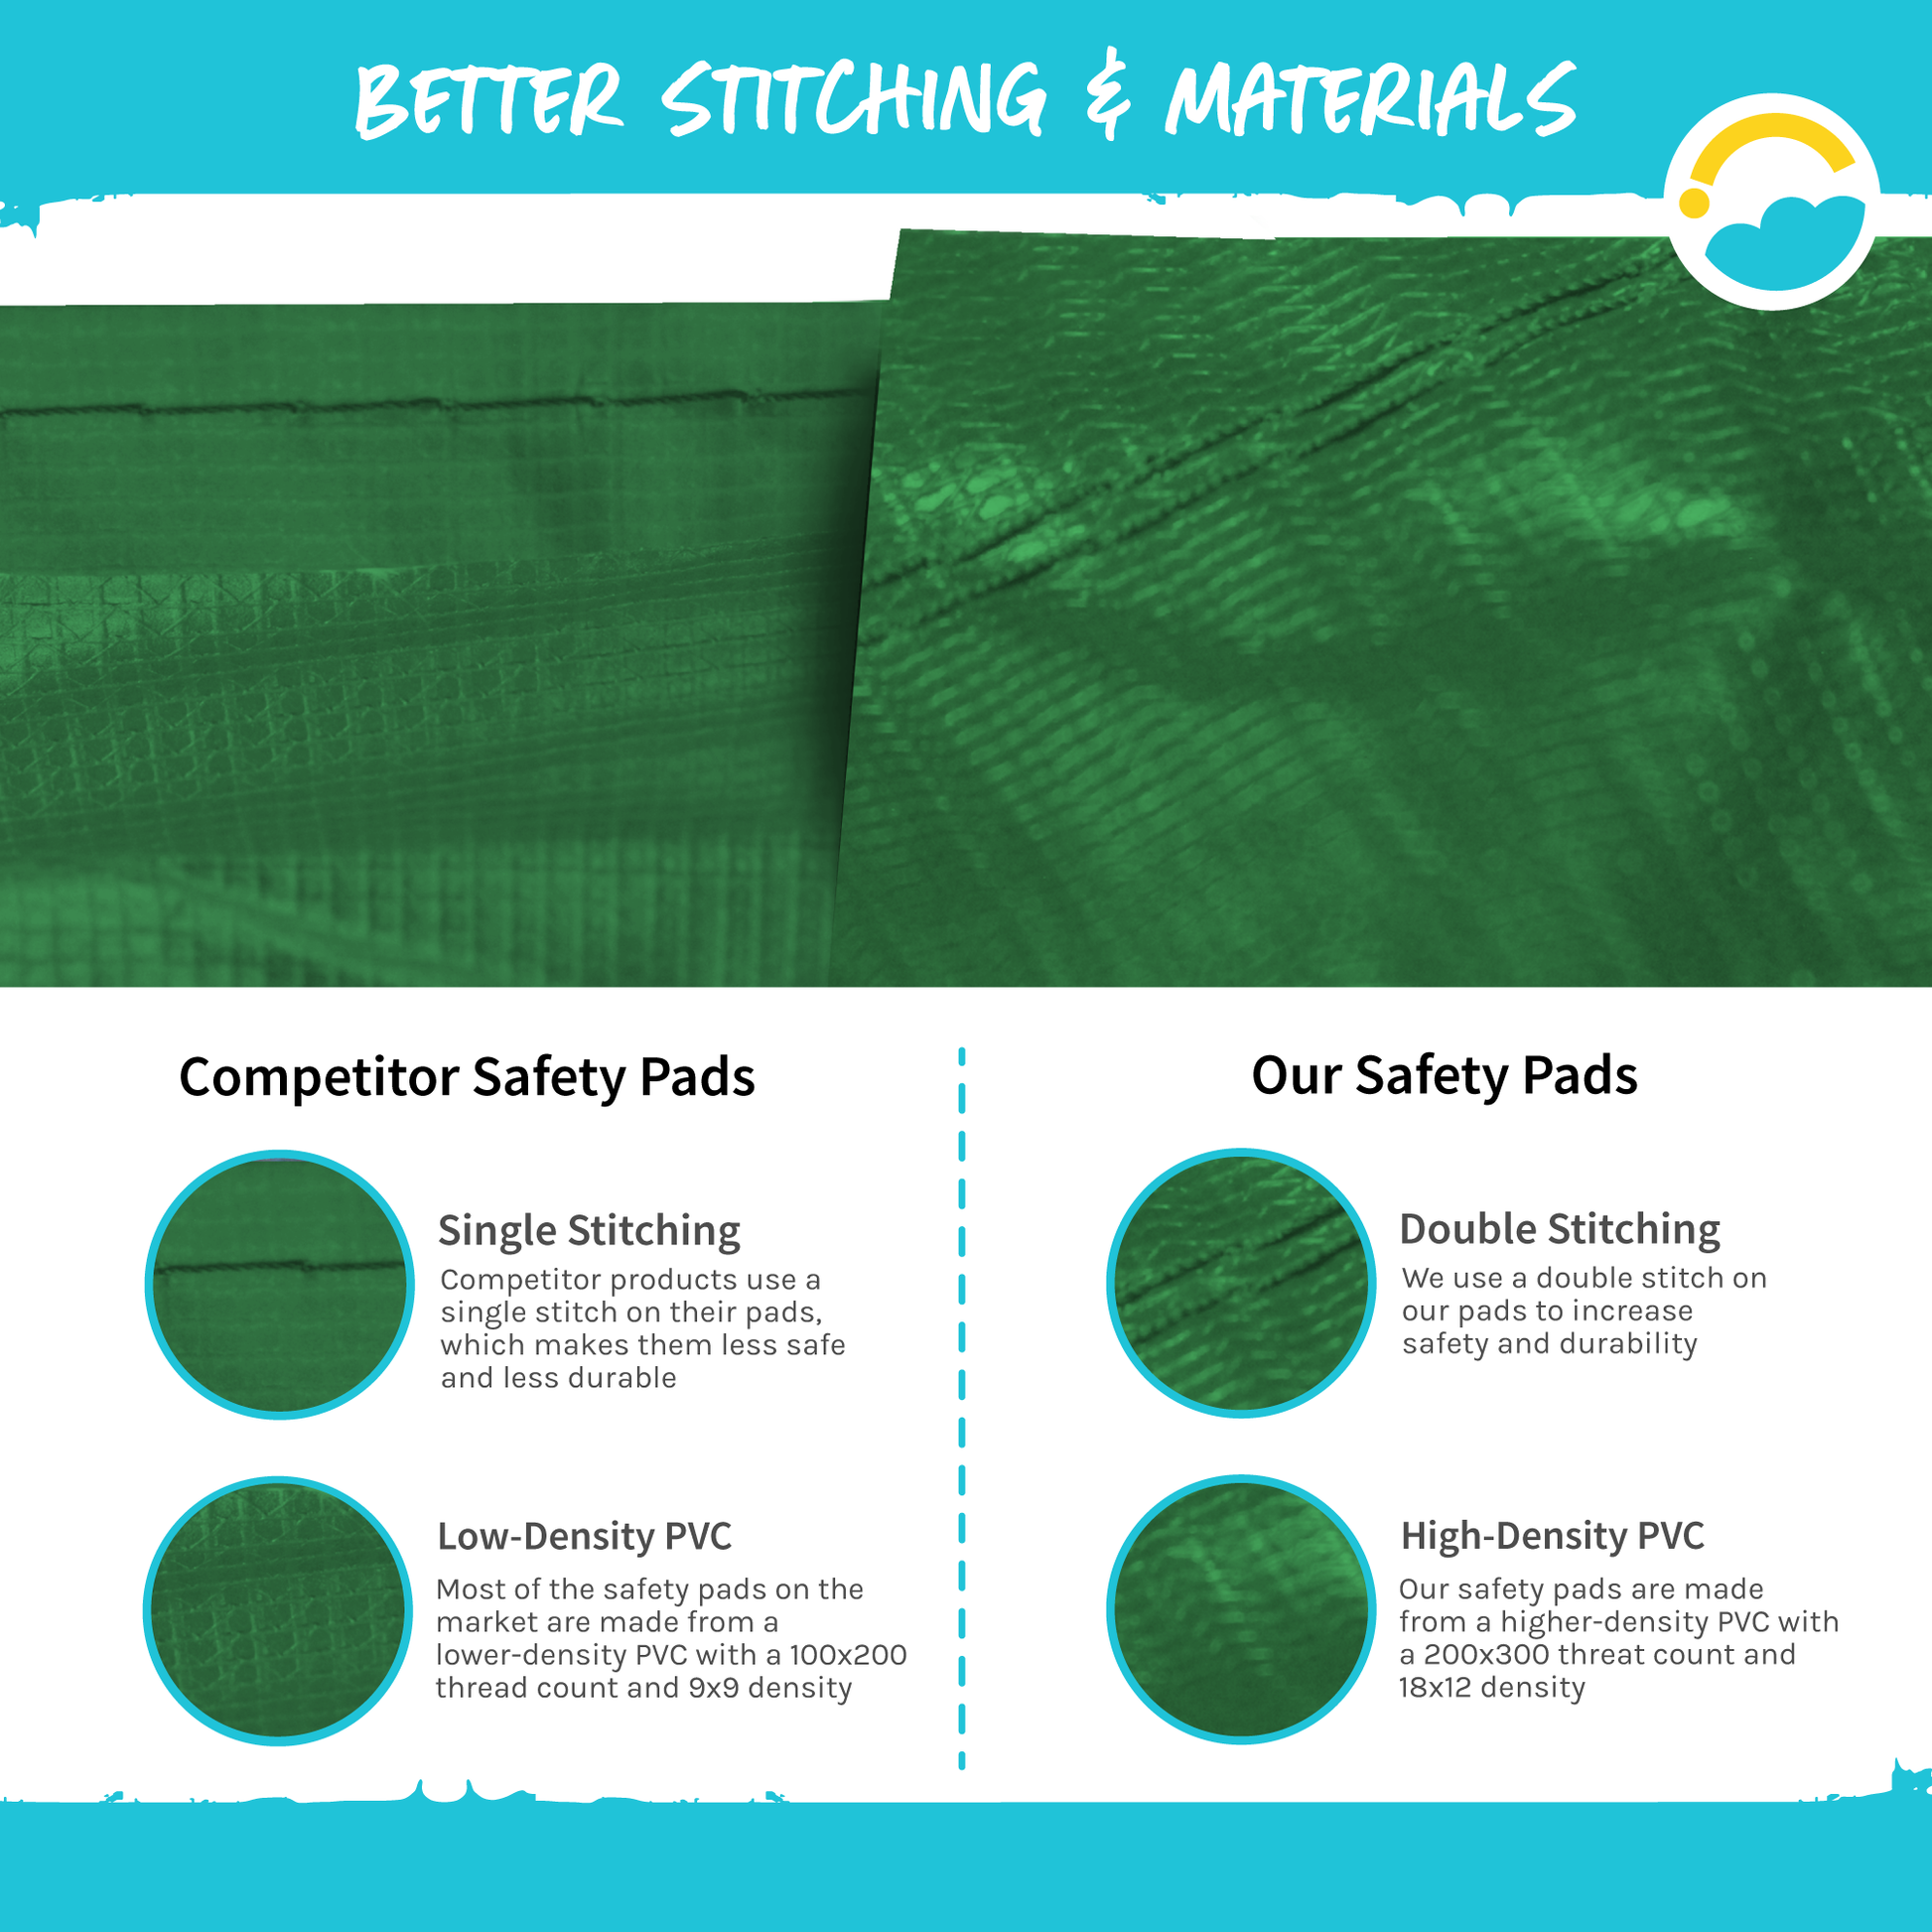 Better Stitching and Materials: Competitor Safety Pads Single Stitching and Low-Density PVC (100x200 thread count and 9x9 density). Our Safety Pads: Double Stitching and High-Density PVC (200x300 thread count and 18x12 density).